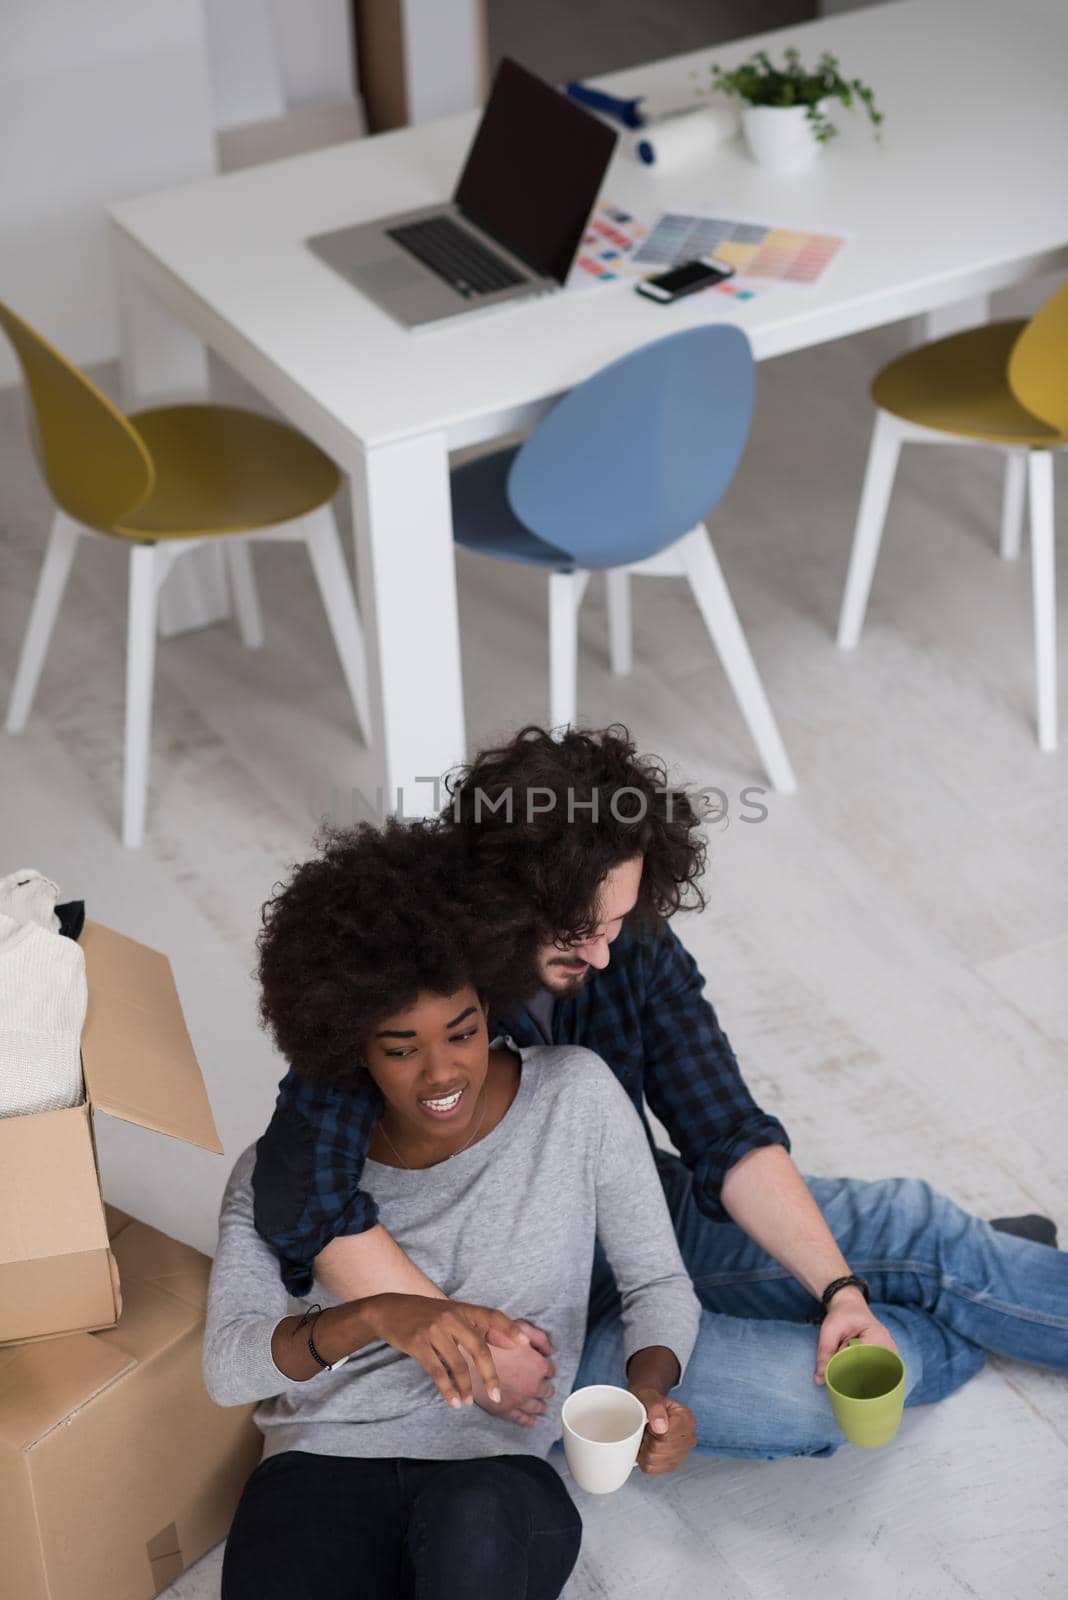 Relaxing in new house. Cheerful young multiethnic couple sitting on the floor and drinking coffee while cardboard boxes laying all around them